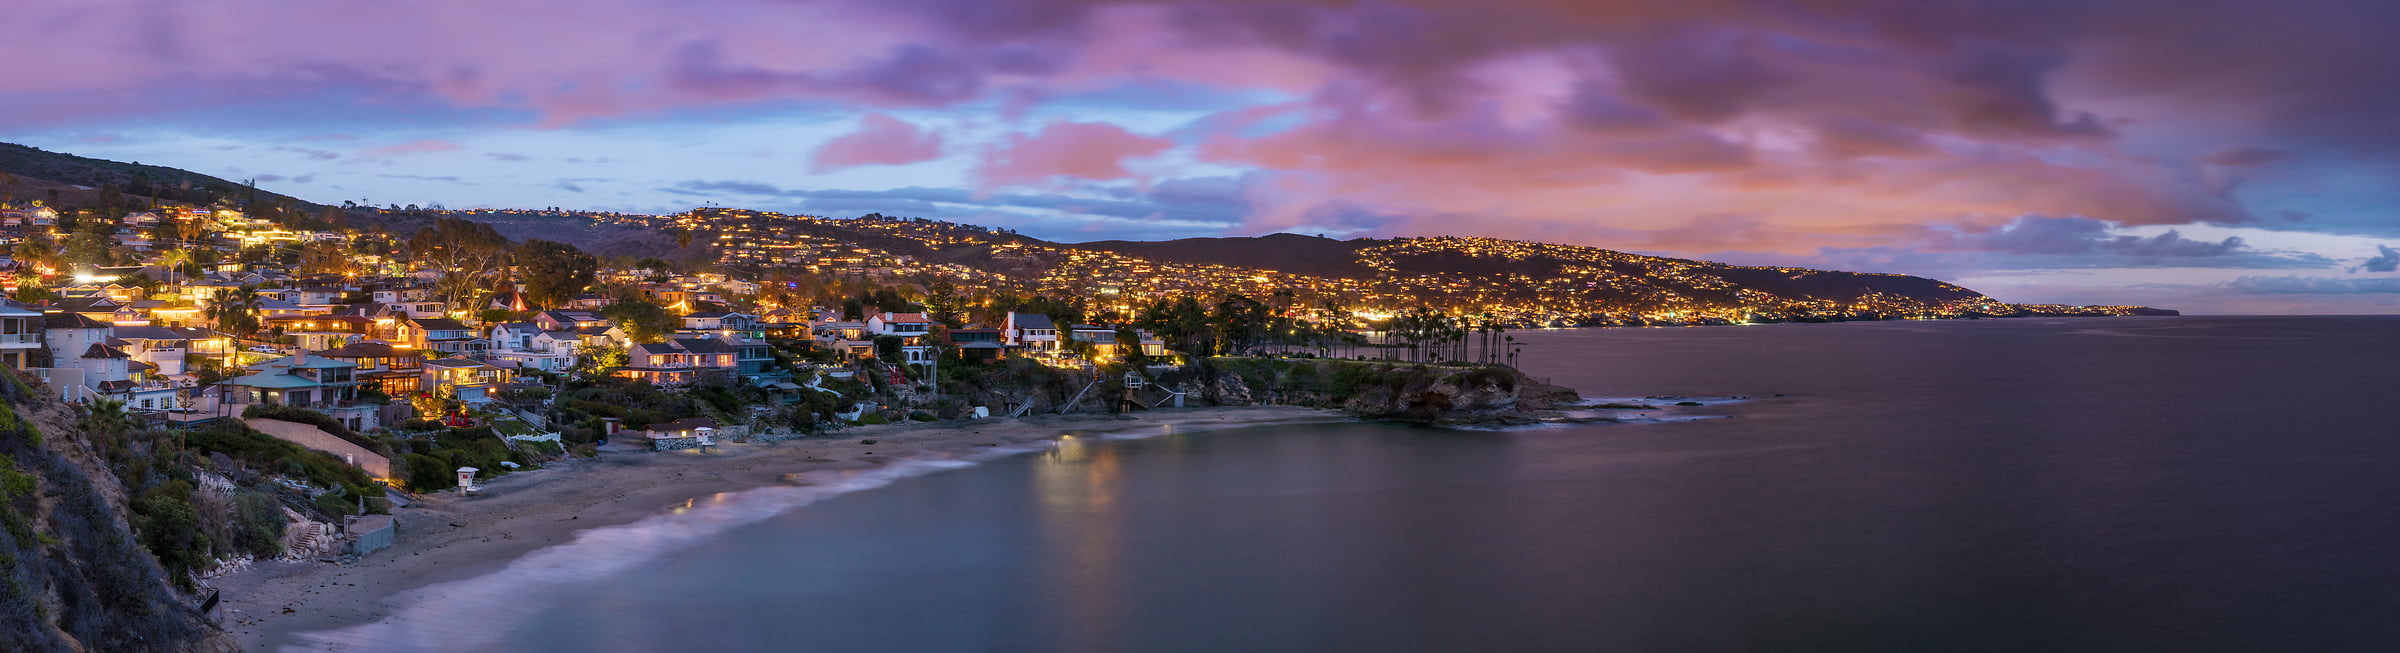 193 megapixels! A very high resolution, large-format VAST photo of a beach town at dusk with a sunset; panorama photograph created by Jim Tarpo in Laguna Beach, California